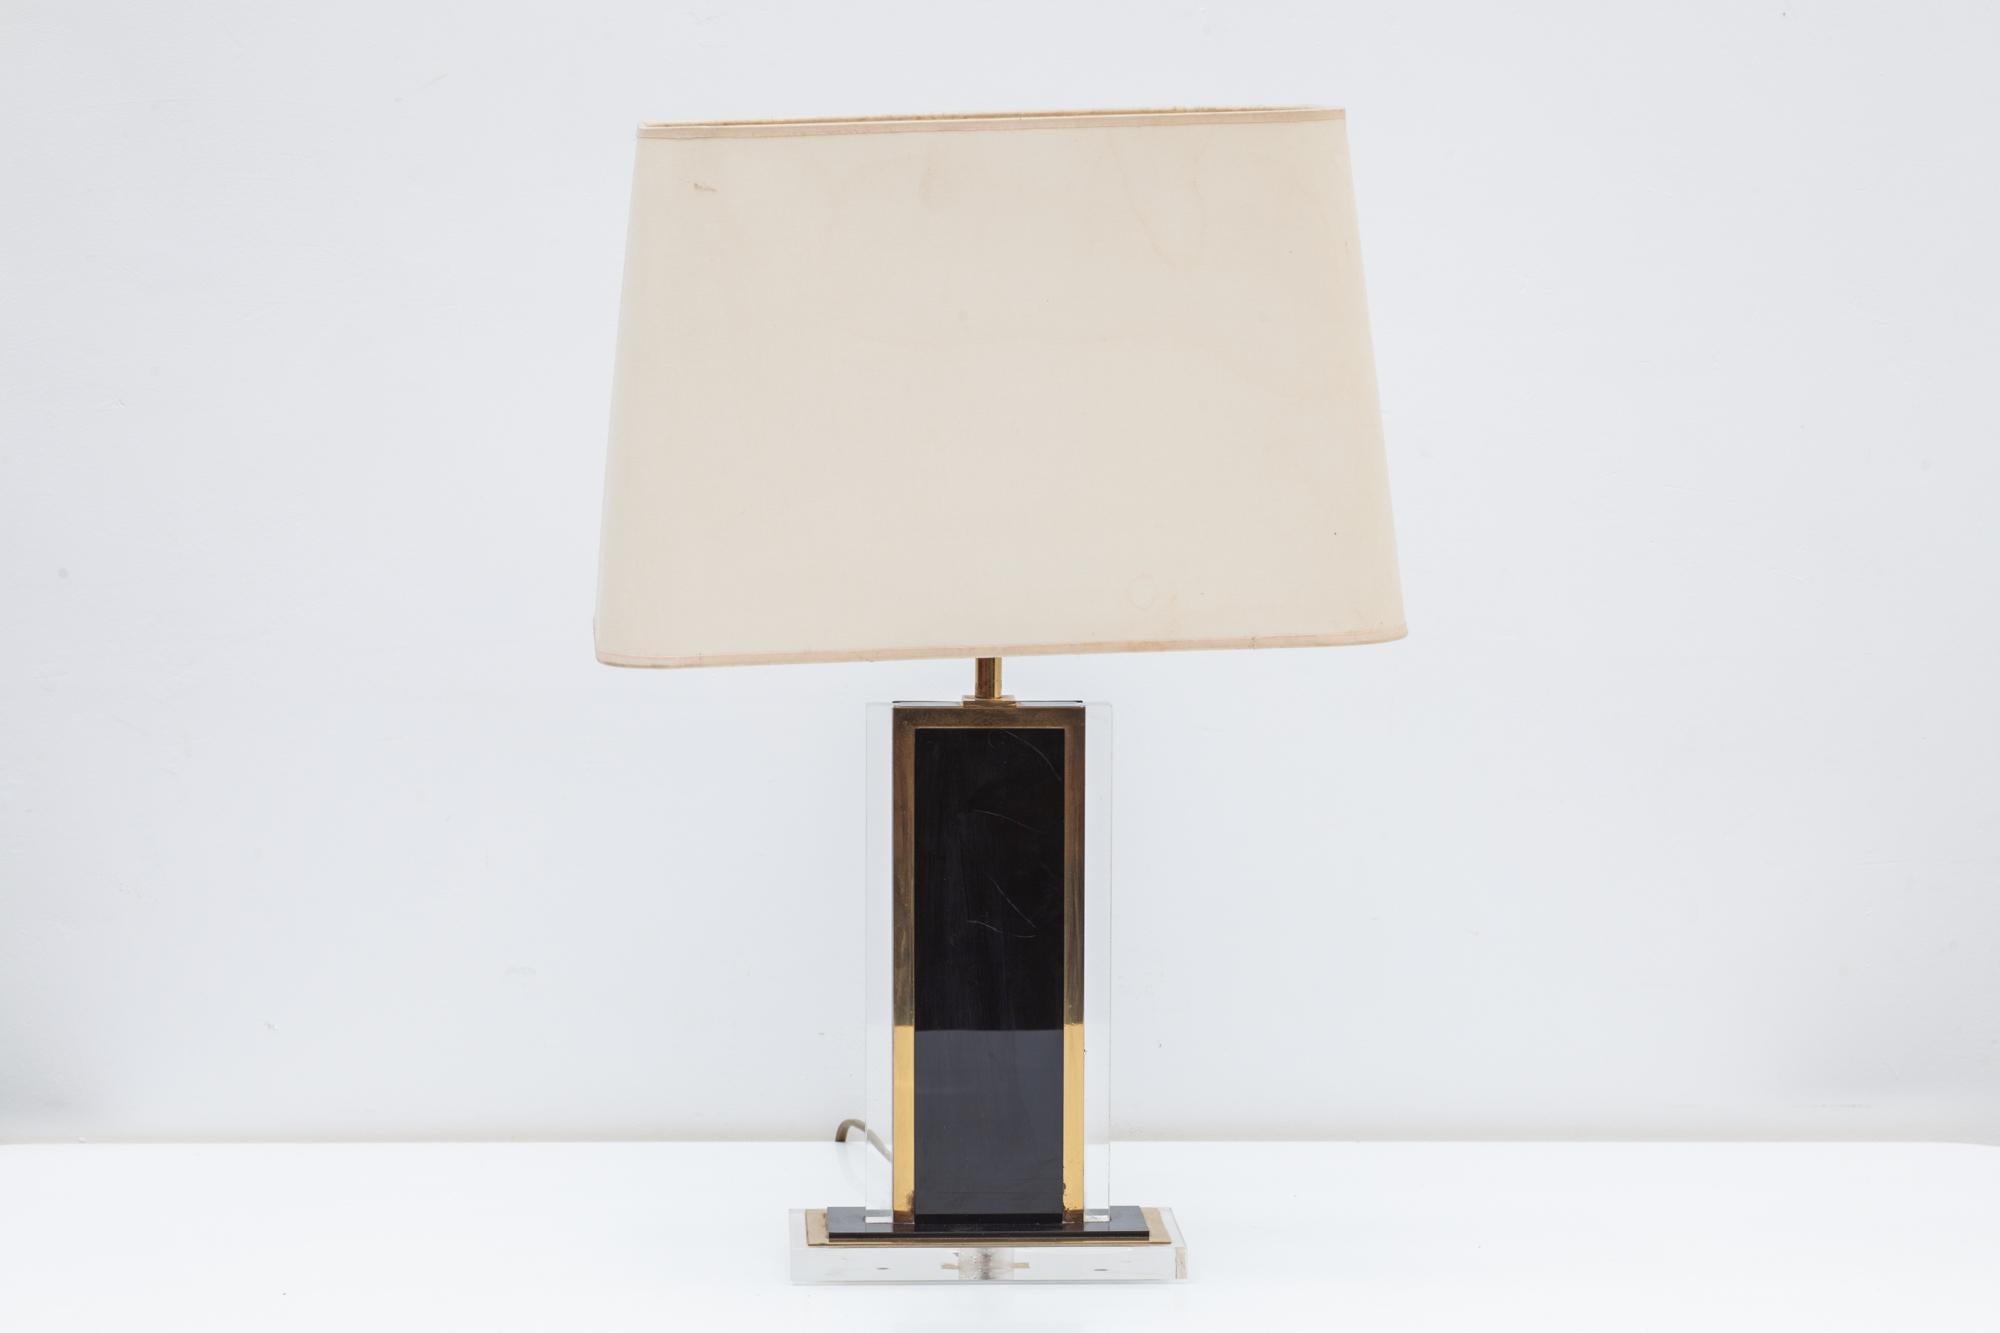 Vintage 1970s table lamps. Black and clear Lucite bases and brass accents with cream silk shades. The Lucite table lamps have the original shades with some watermarks, these are easy to replace to your own taste.
Bases: 18.5 W x 35 H x 10 D cm